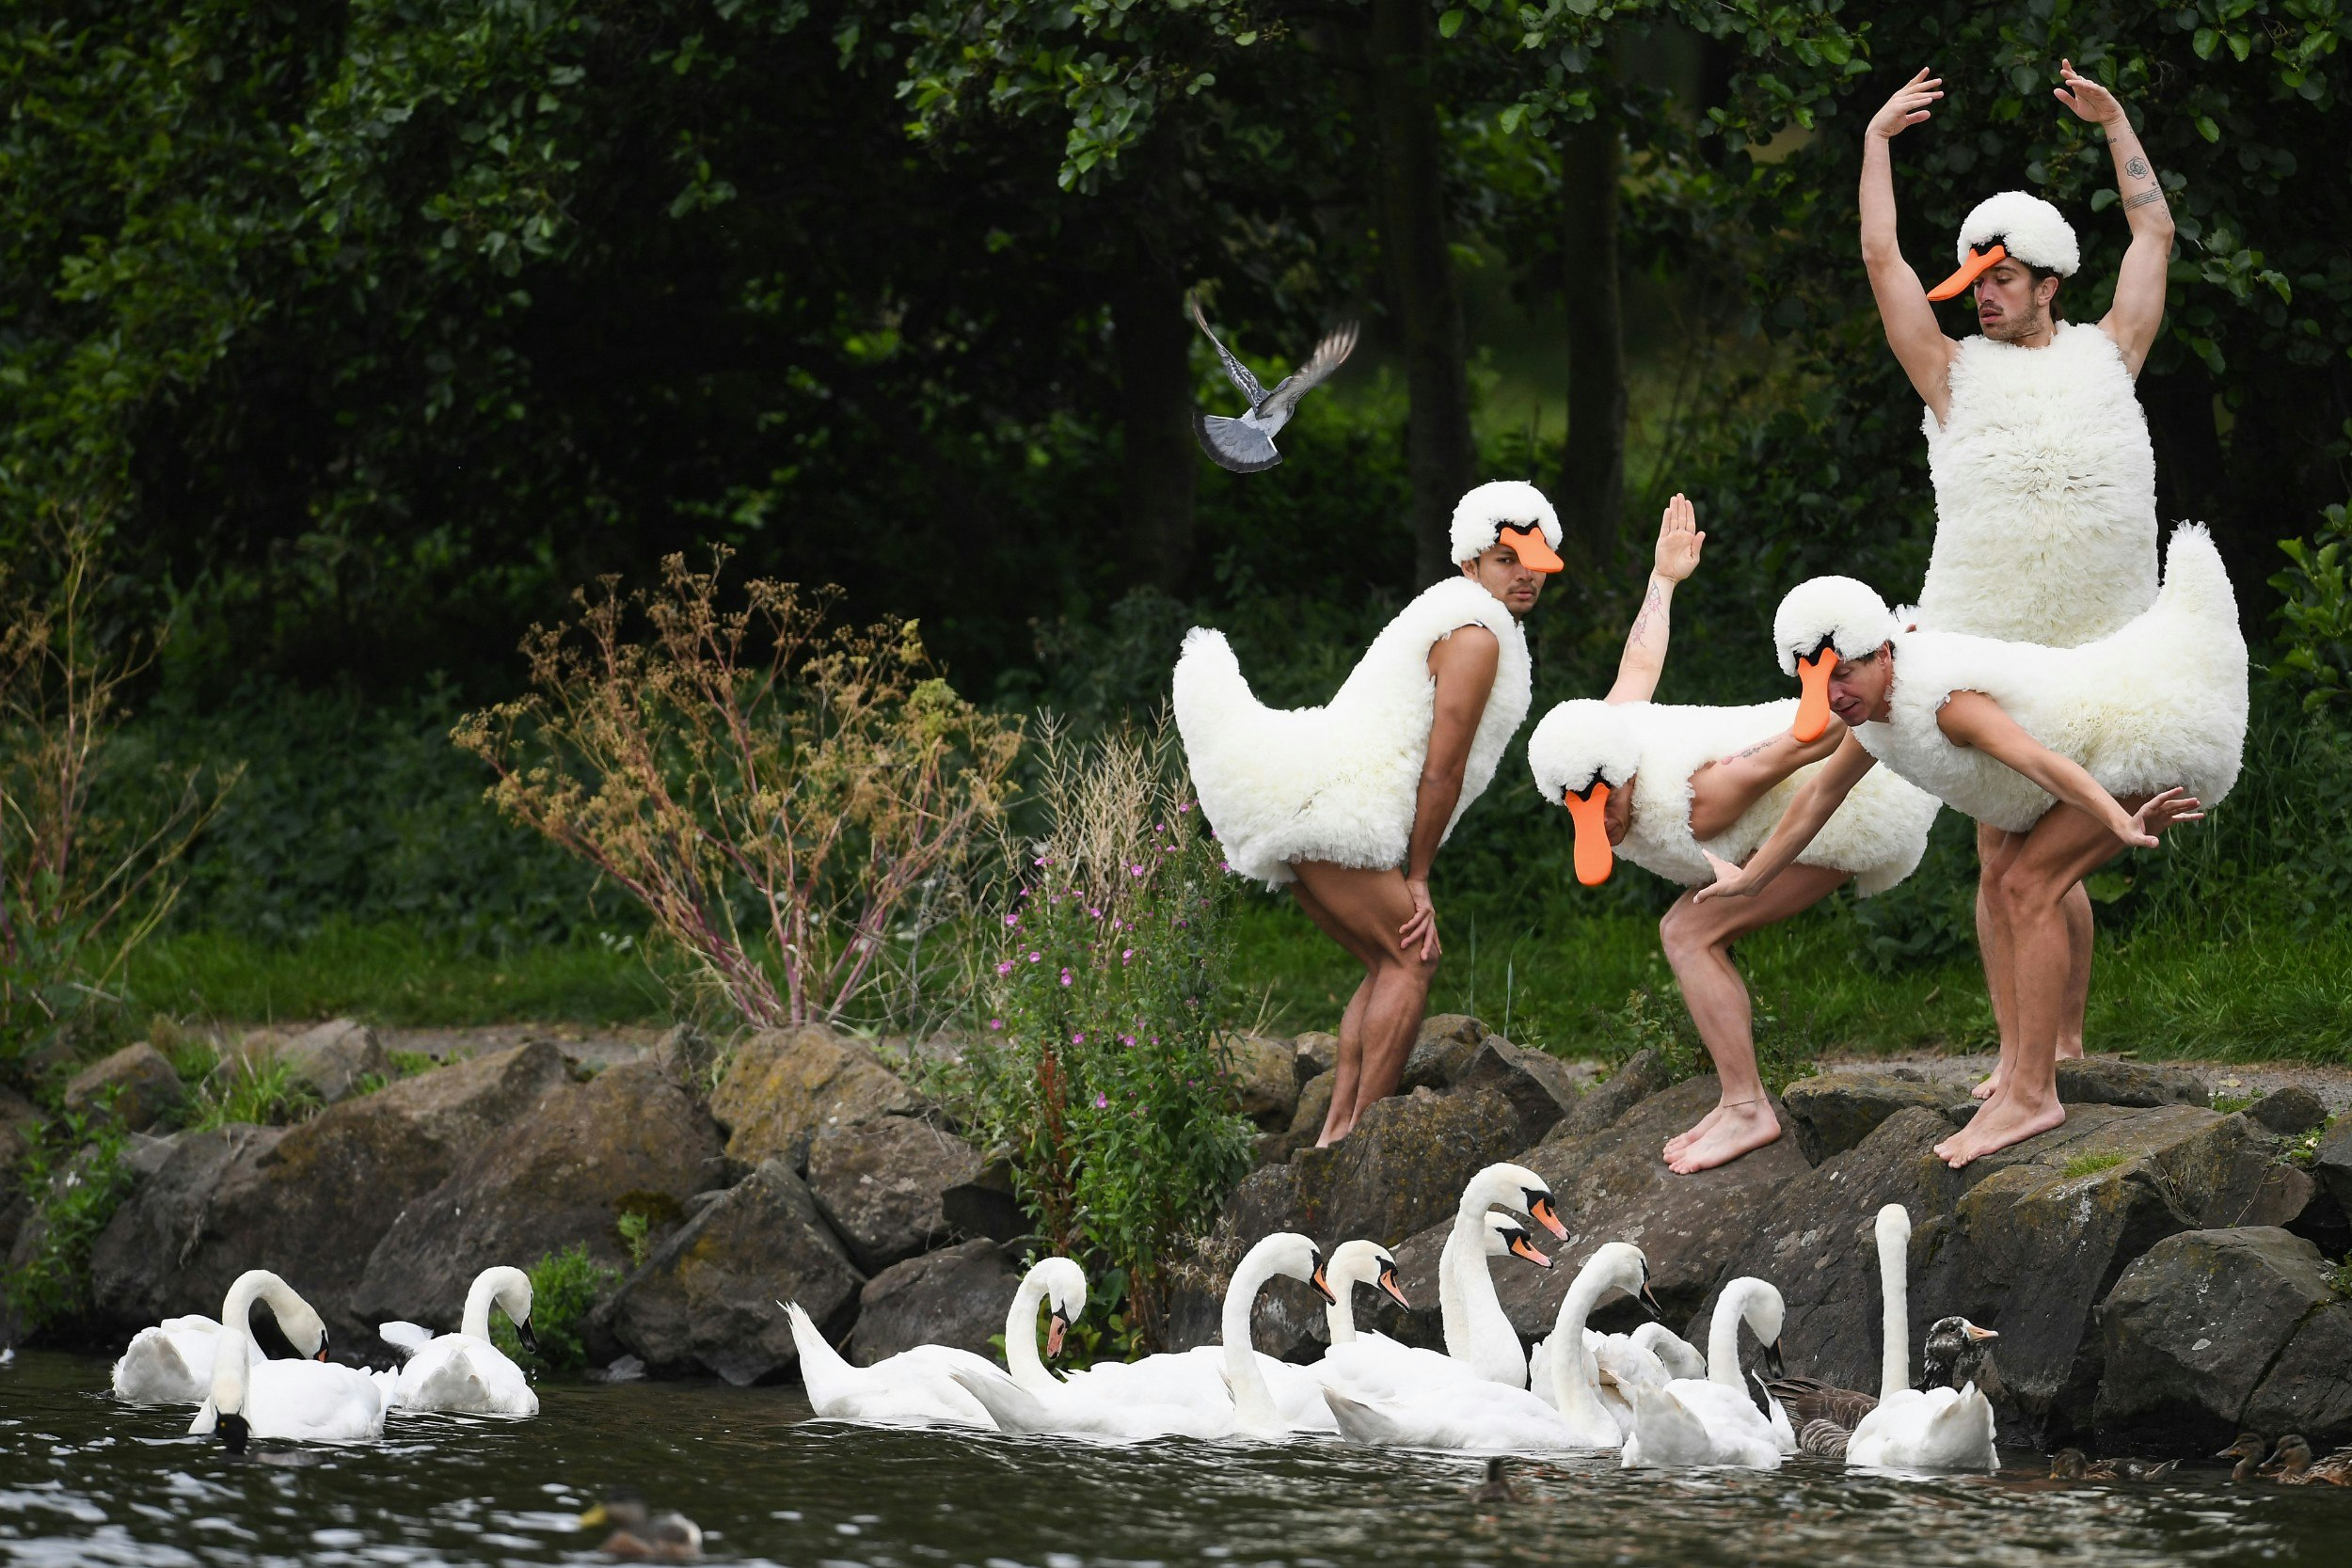 Performers dressed as swans pictured beside real swans in a river